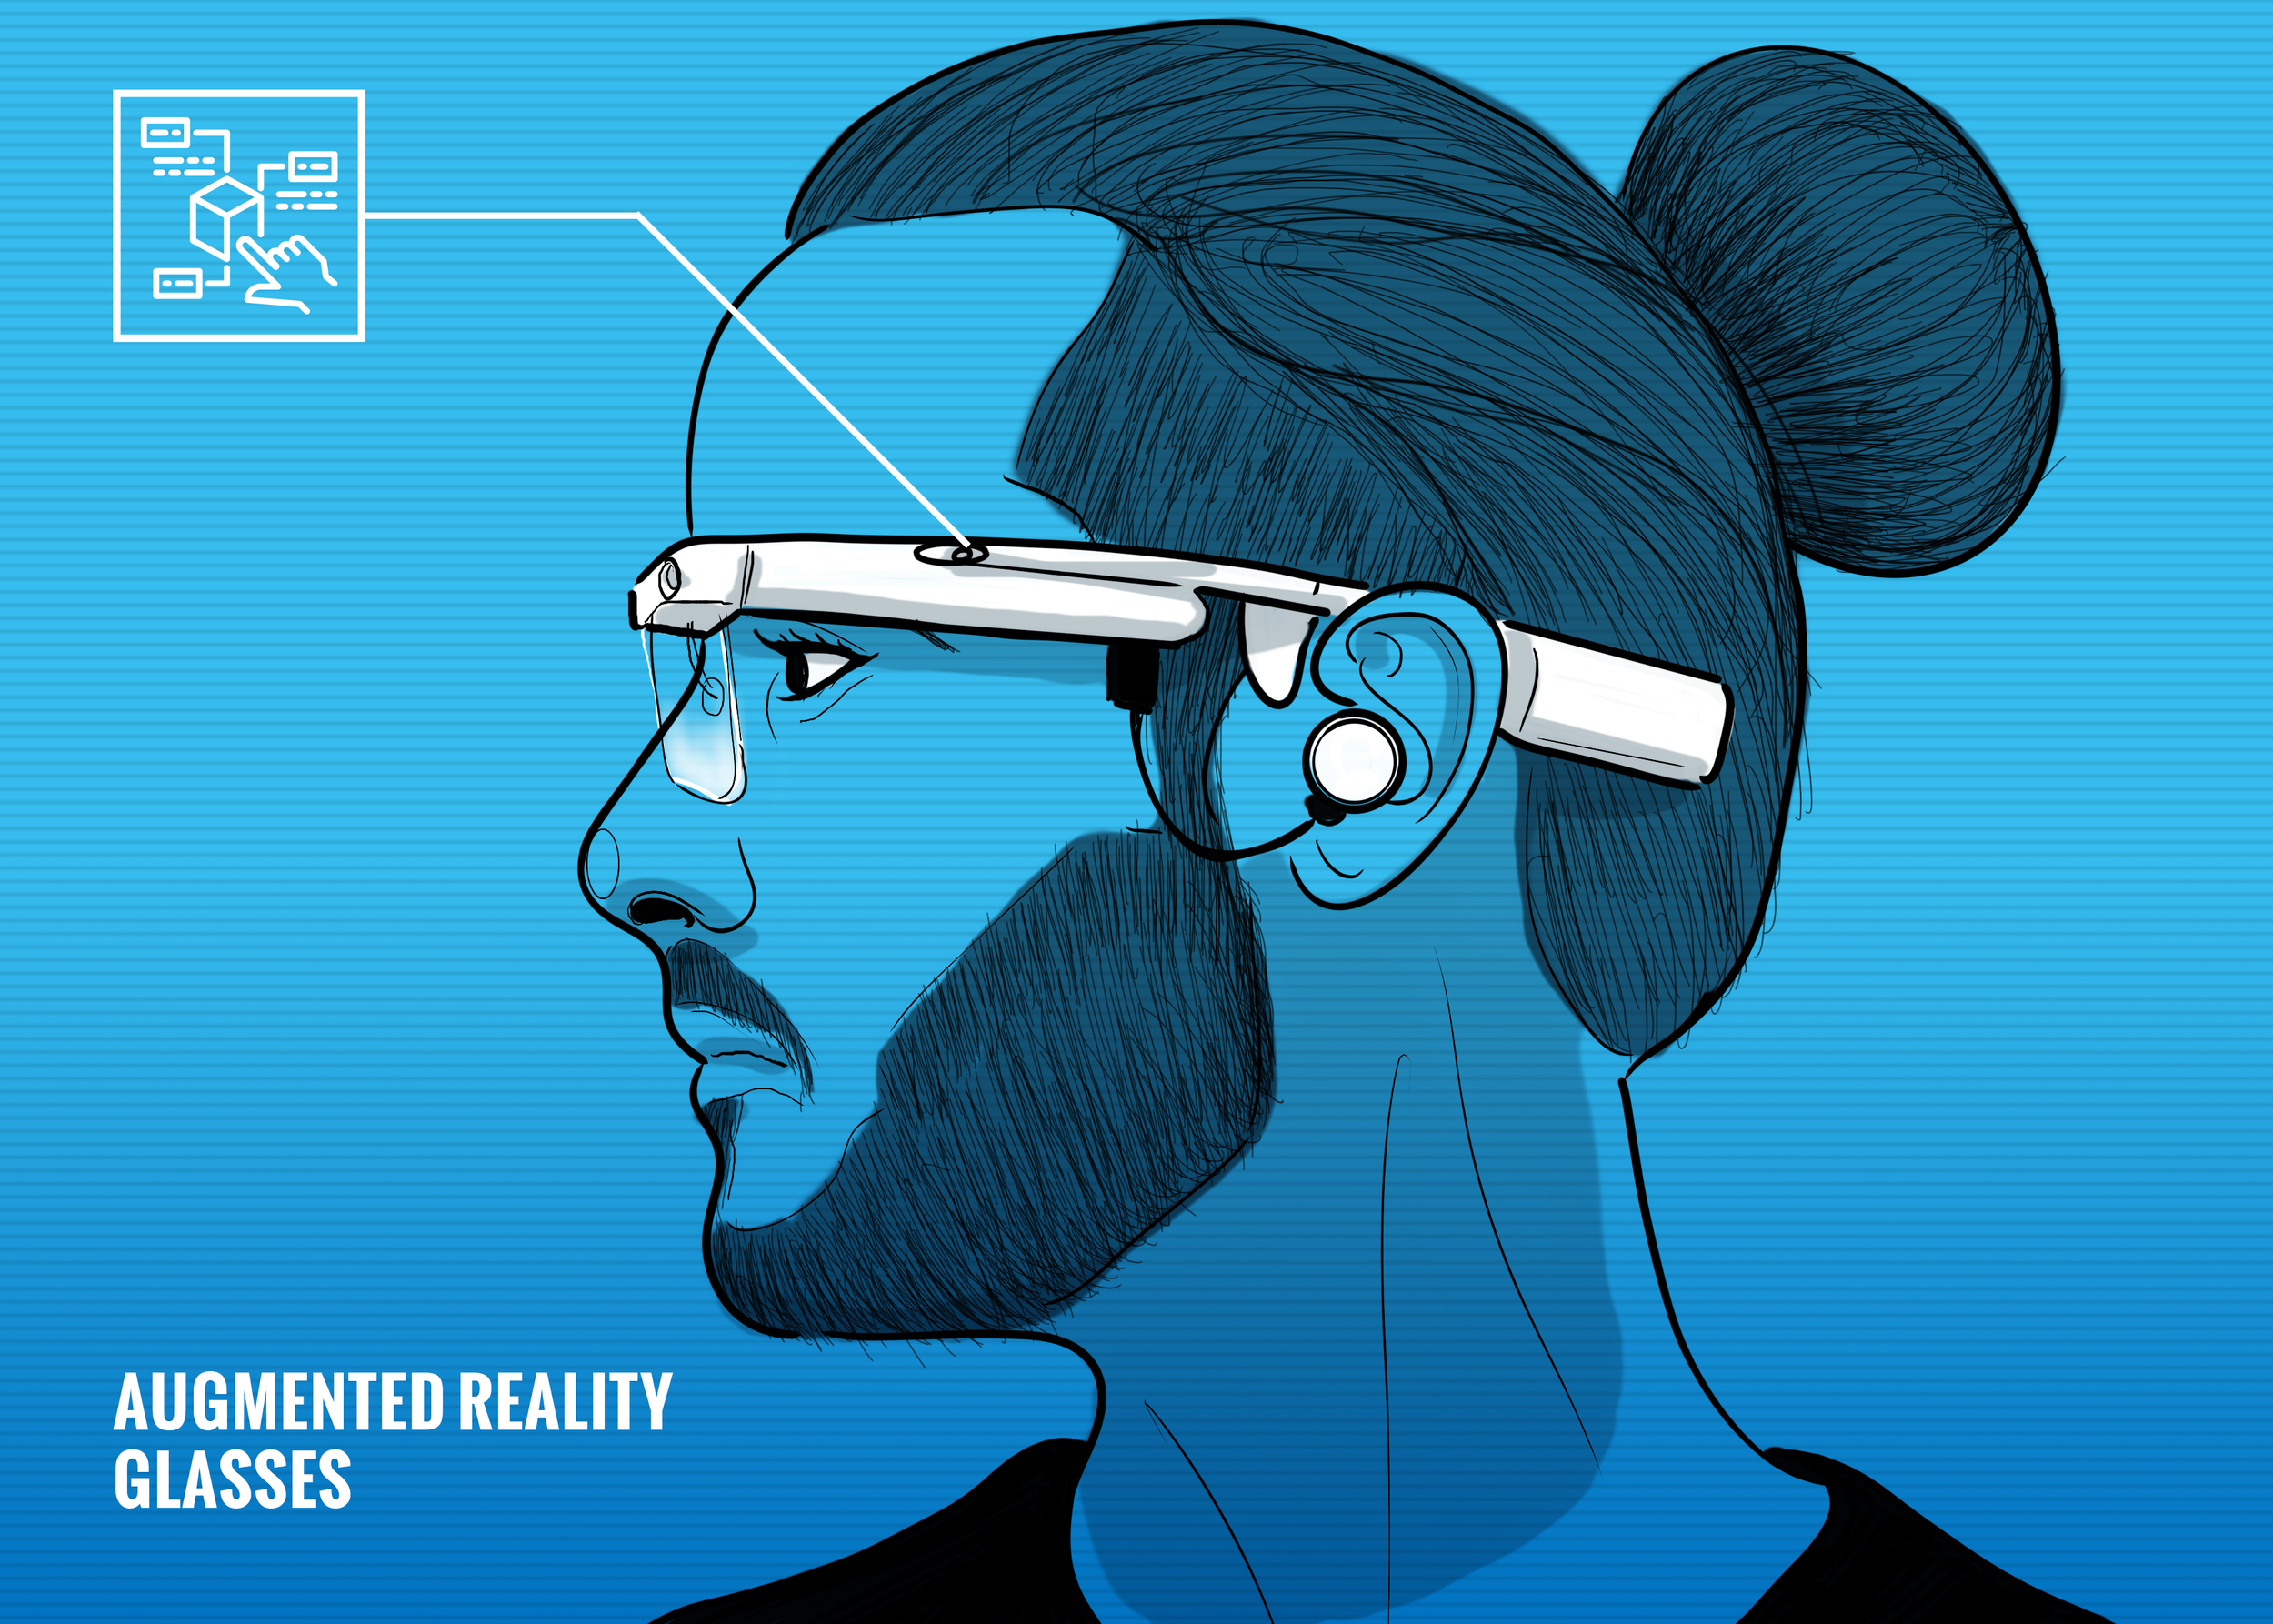 26 - Augmented reality glasses MKT.png